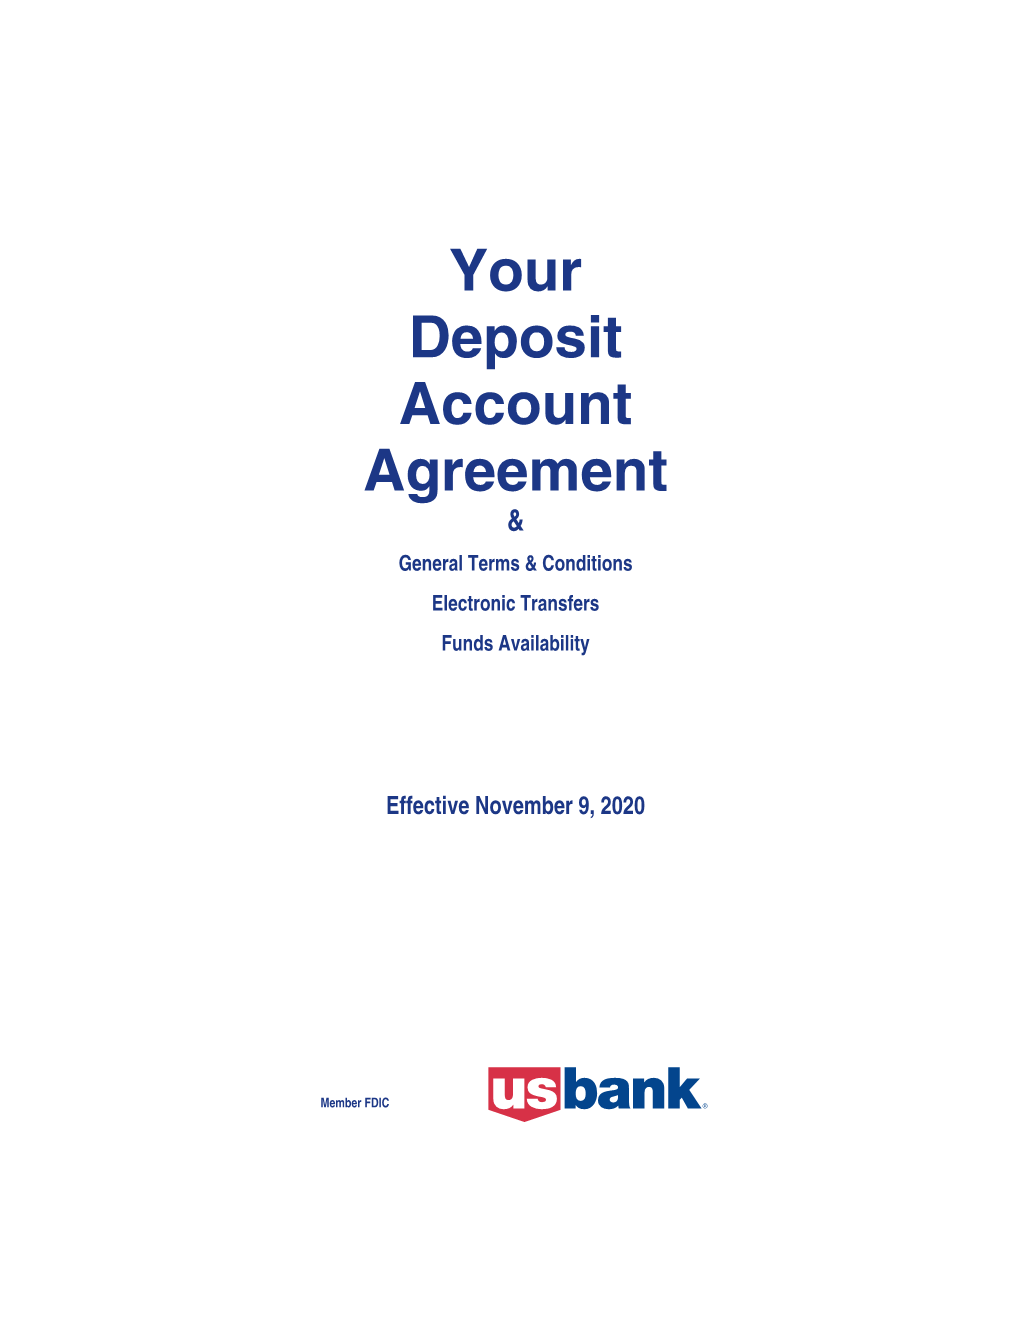 Your Deposit Account Agreement & General Terms & Conditions Electronic Transfers Funds Availability